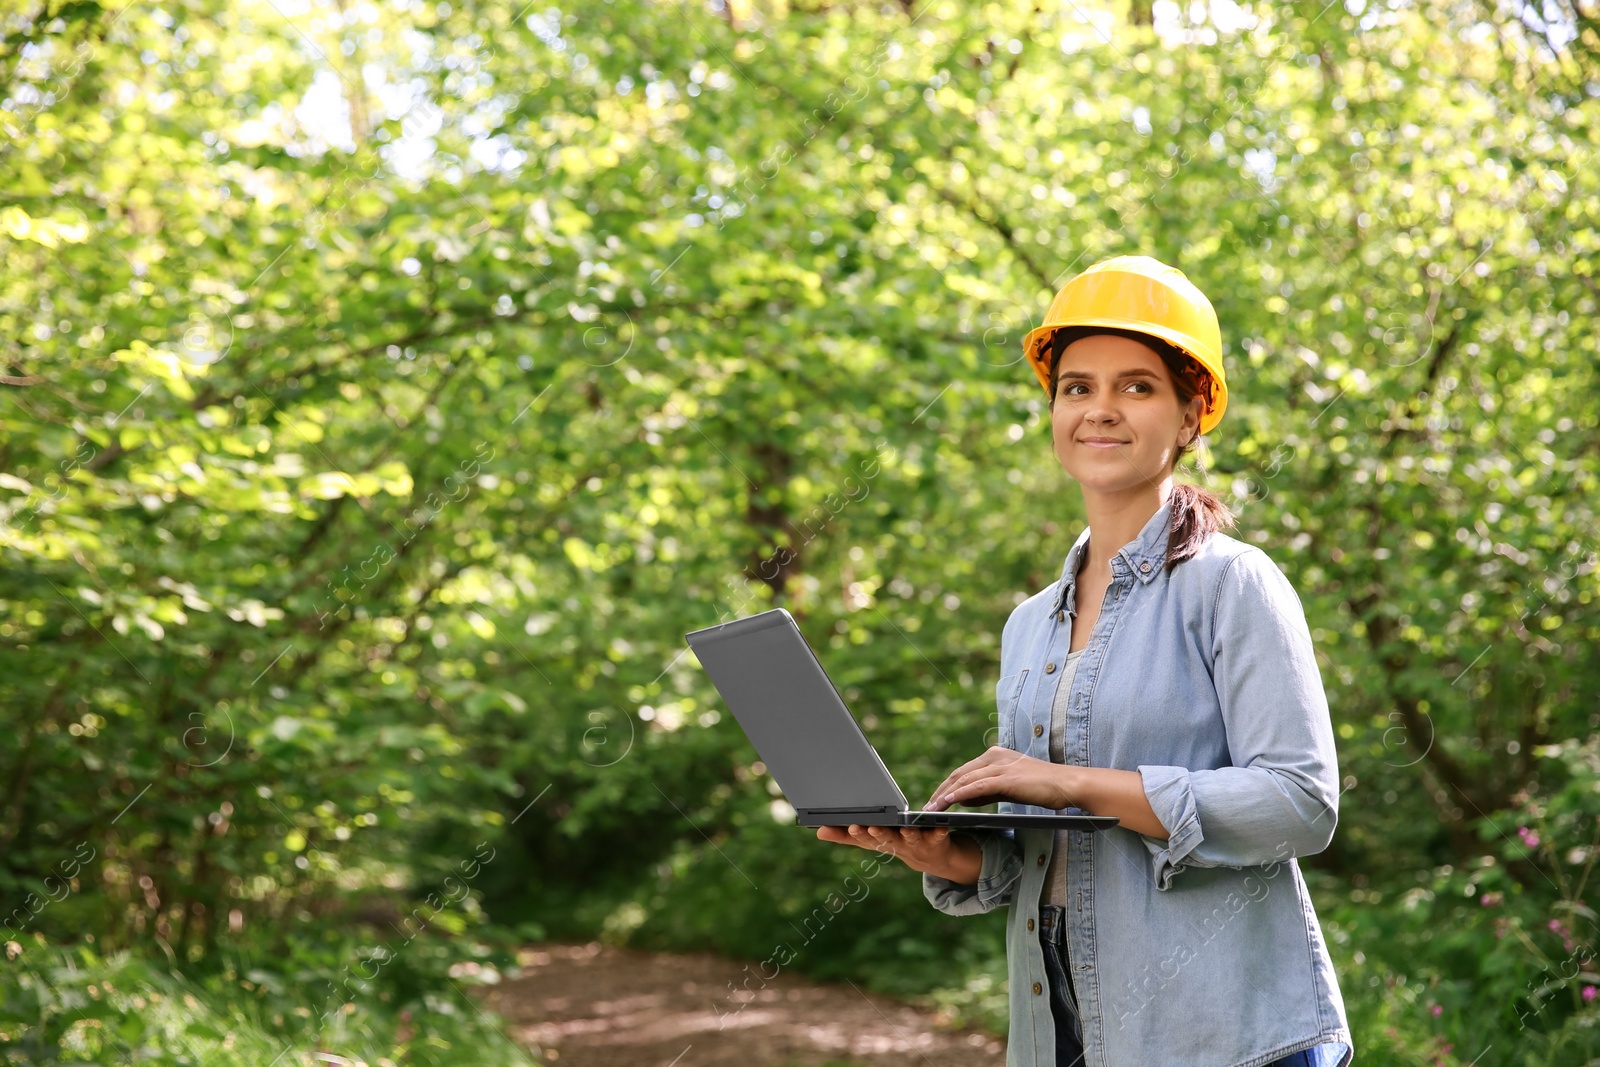 Photo of Forester with laptop examining plants in forest, space for text